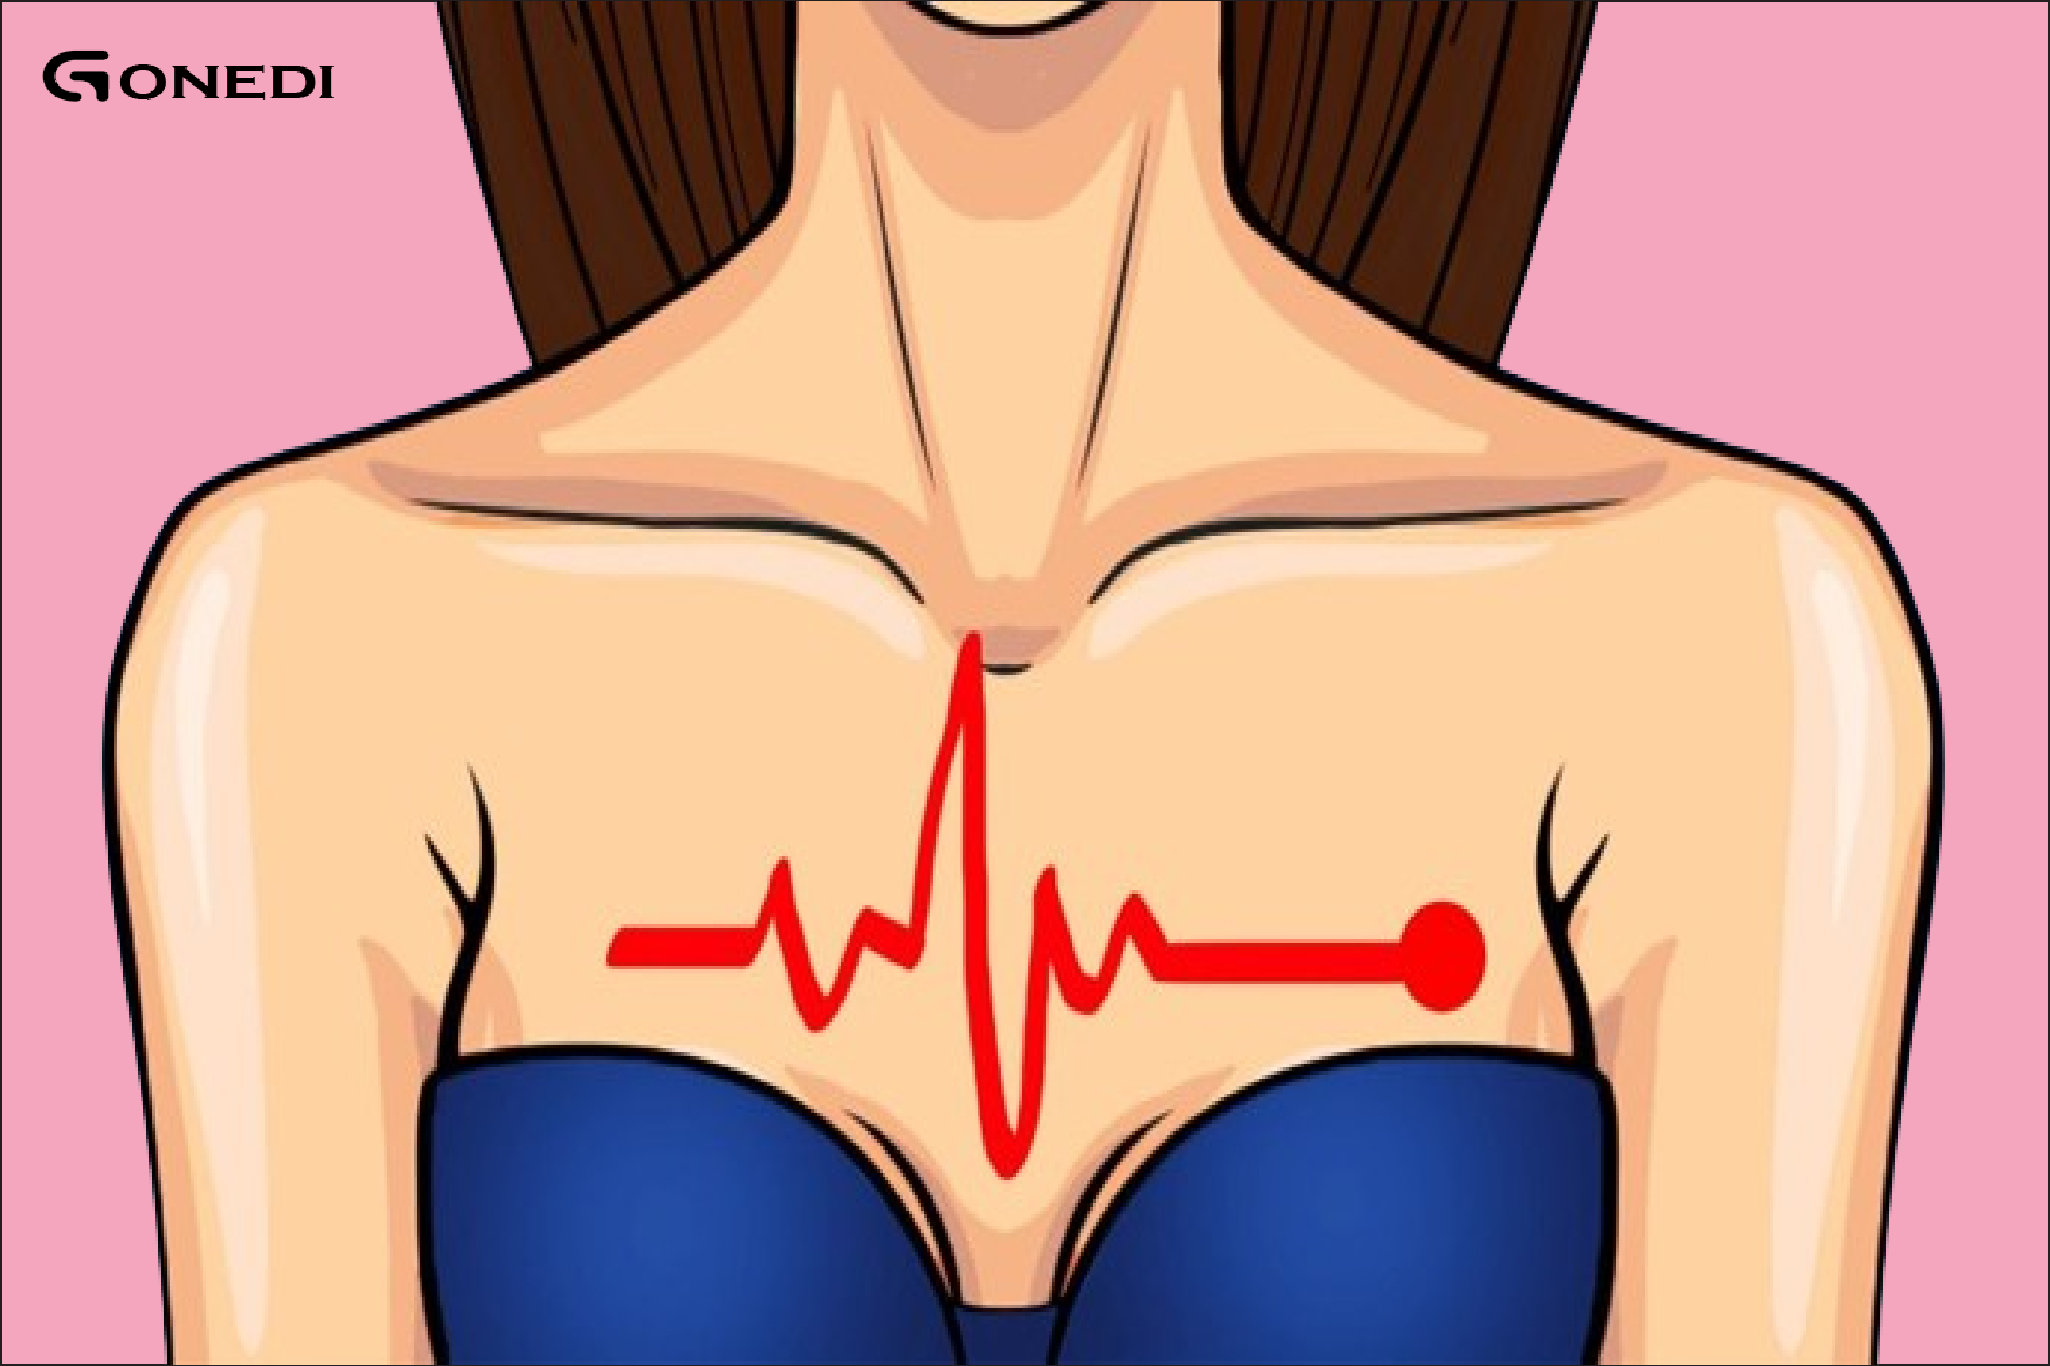 6 warning signs your body may be giving you a month before a heart attack